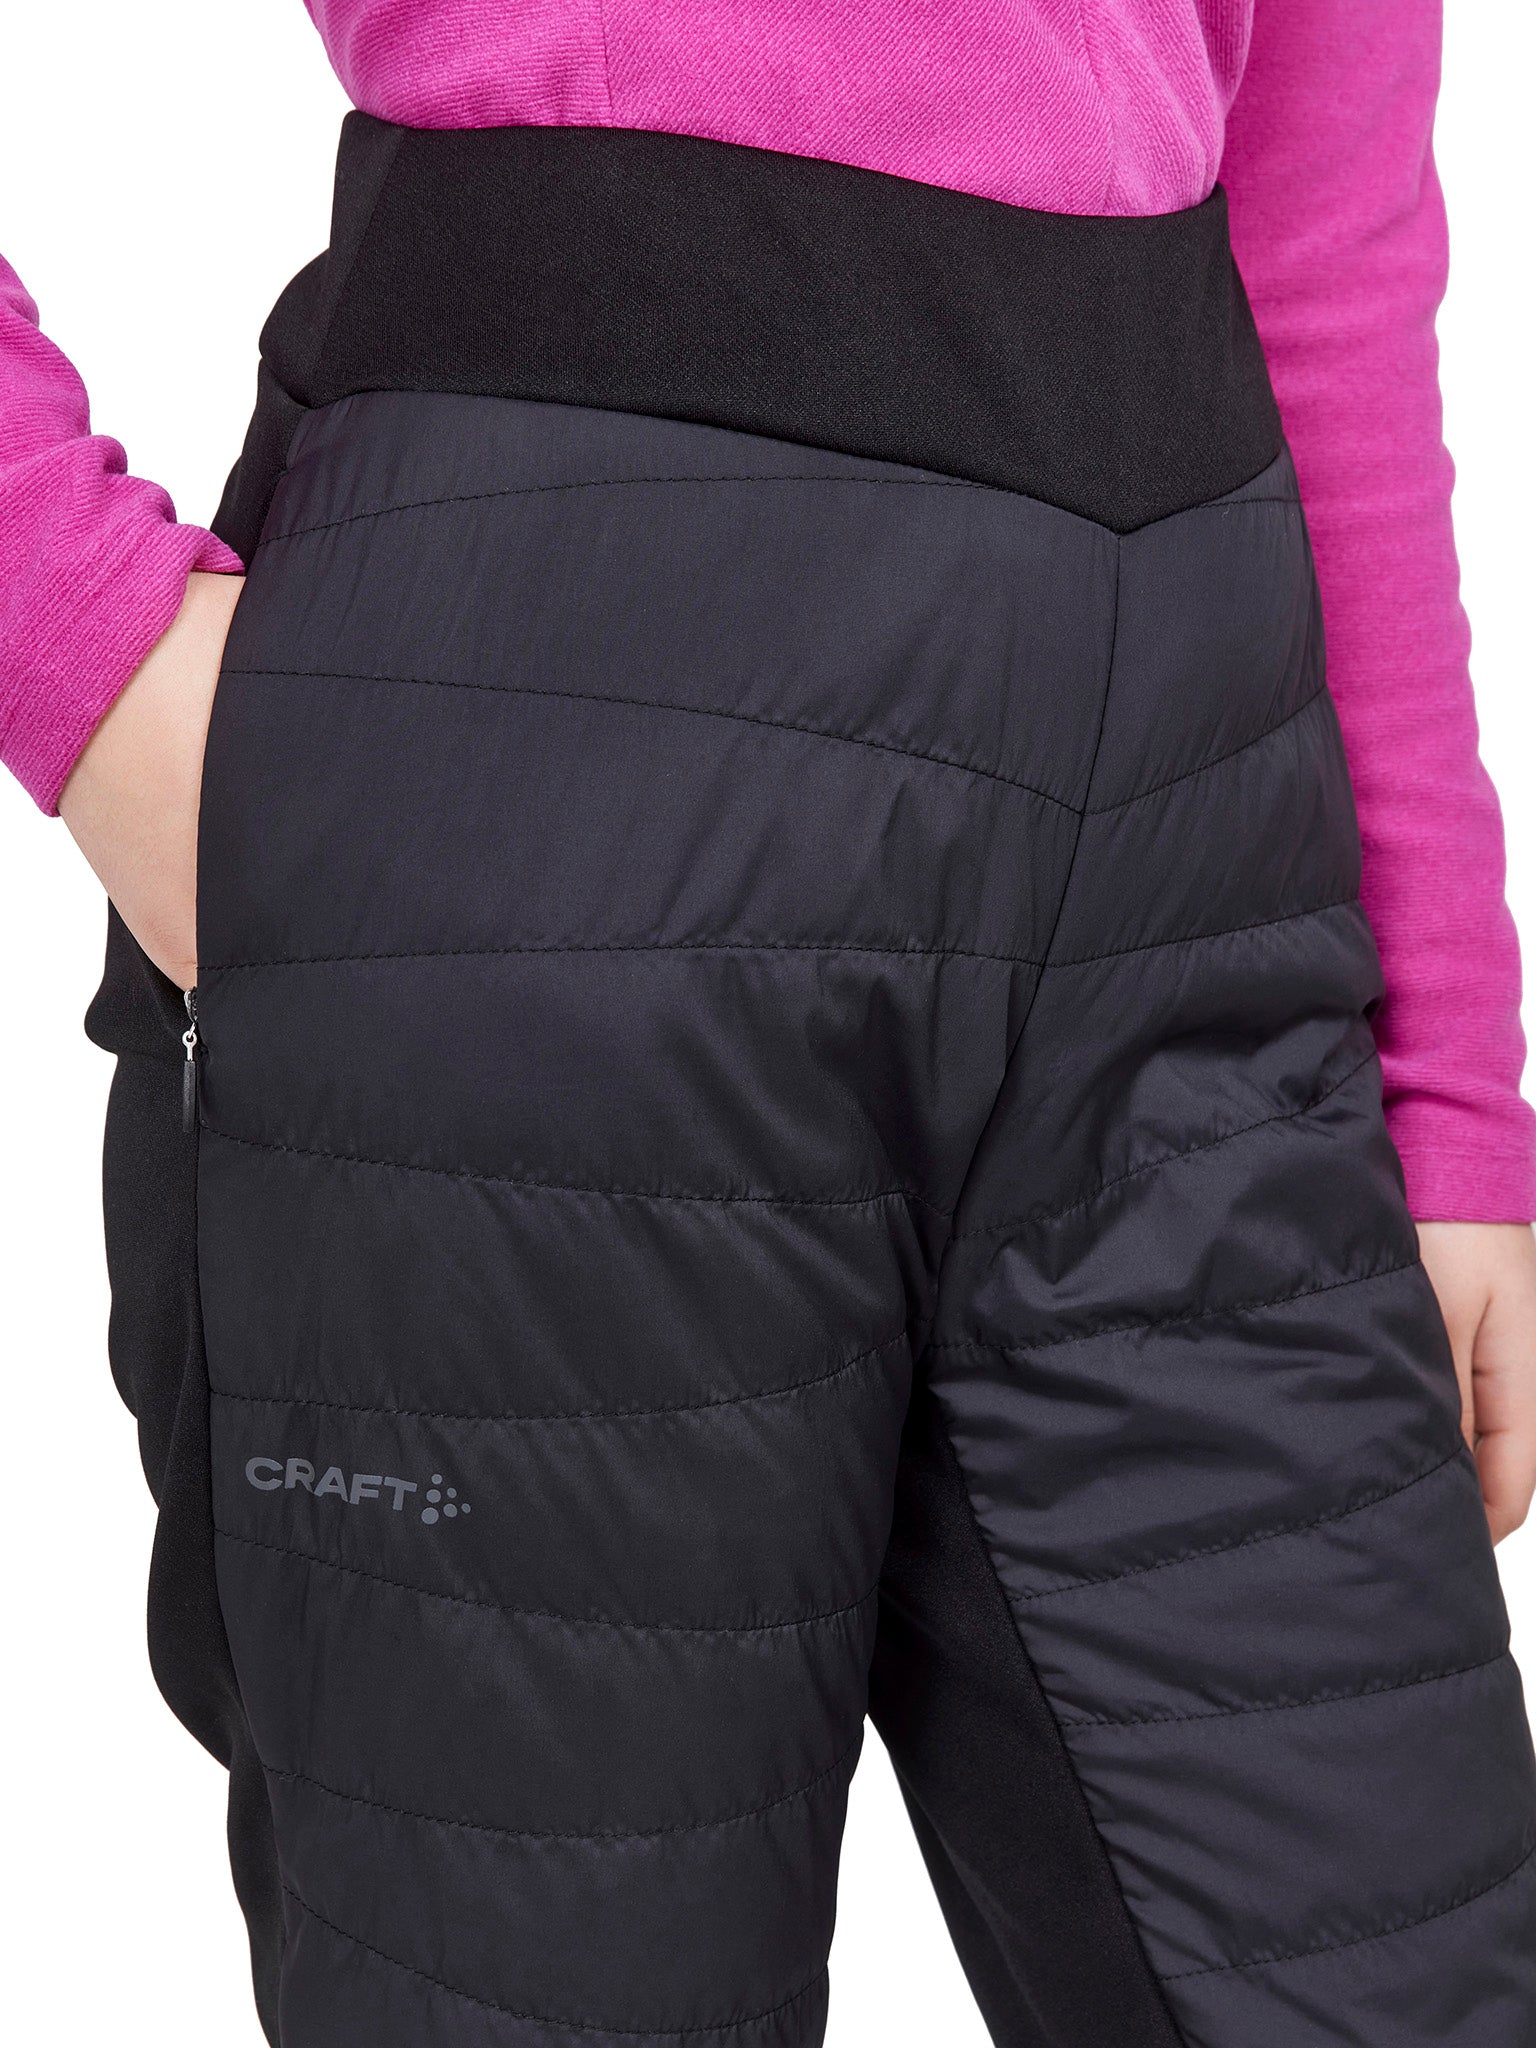 Craft Core Nordic Training Insulated Pants - Women's